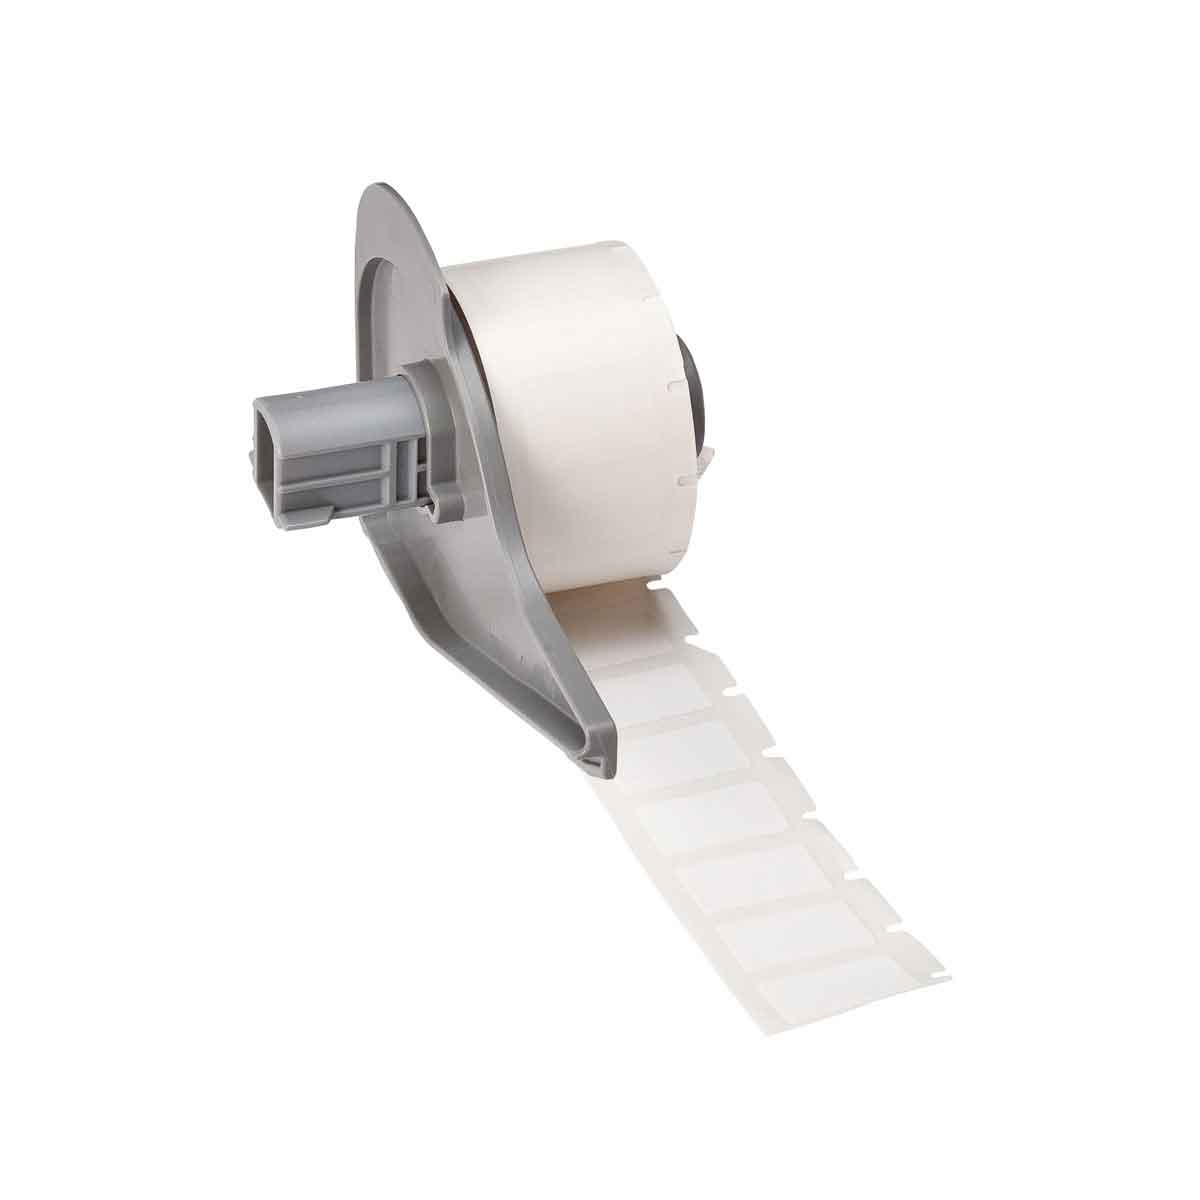 Brady M71-84-499 Nylon Cloth BMP71 Labels White 500 Labels per Roll, 1 Roll per Package